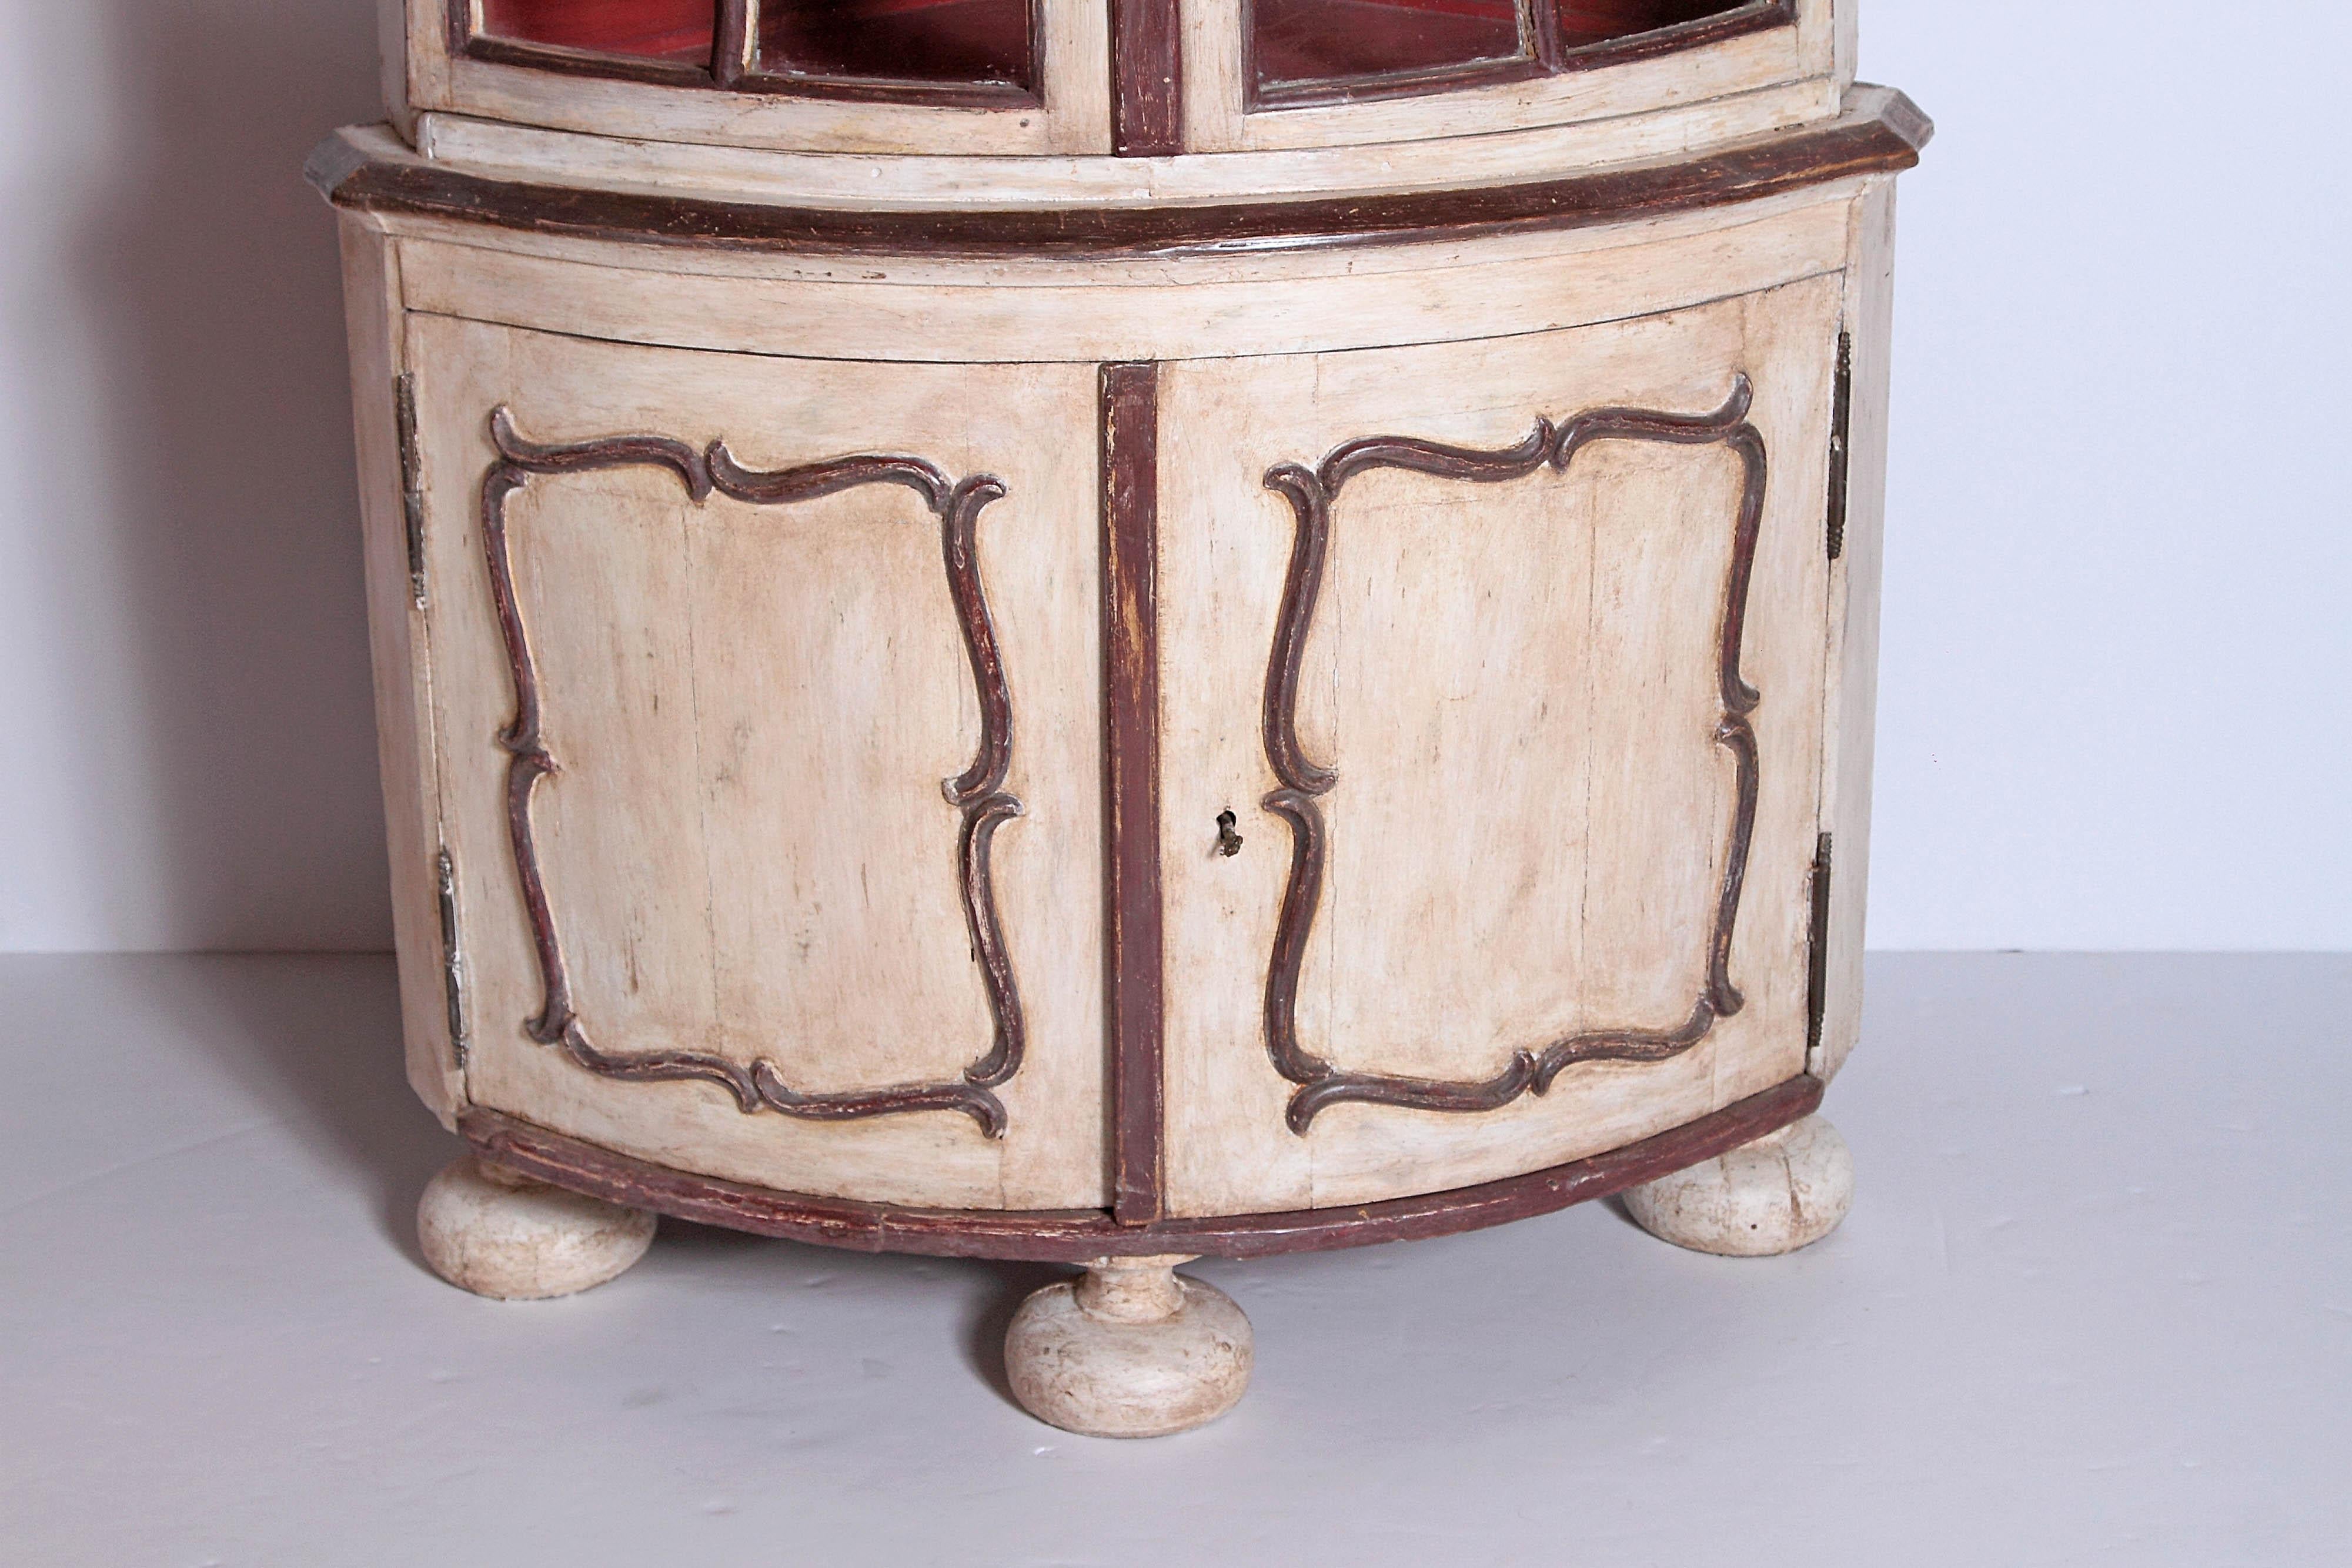 French Provincial Early 18th Century Continental Corner Cabinet